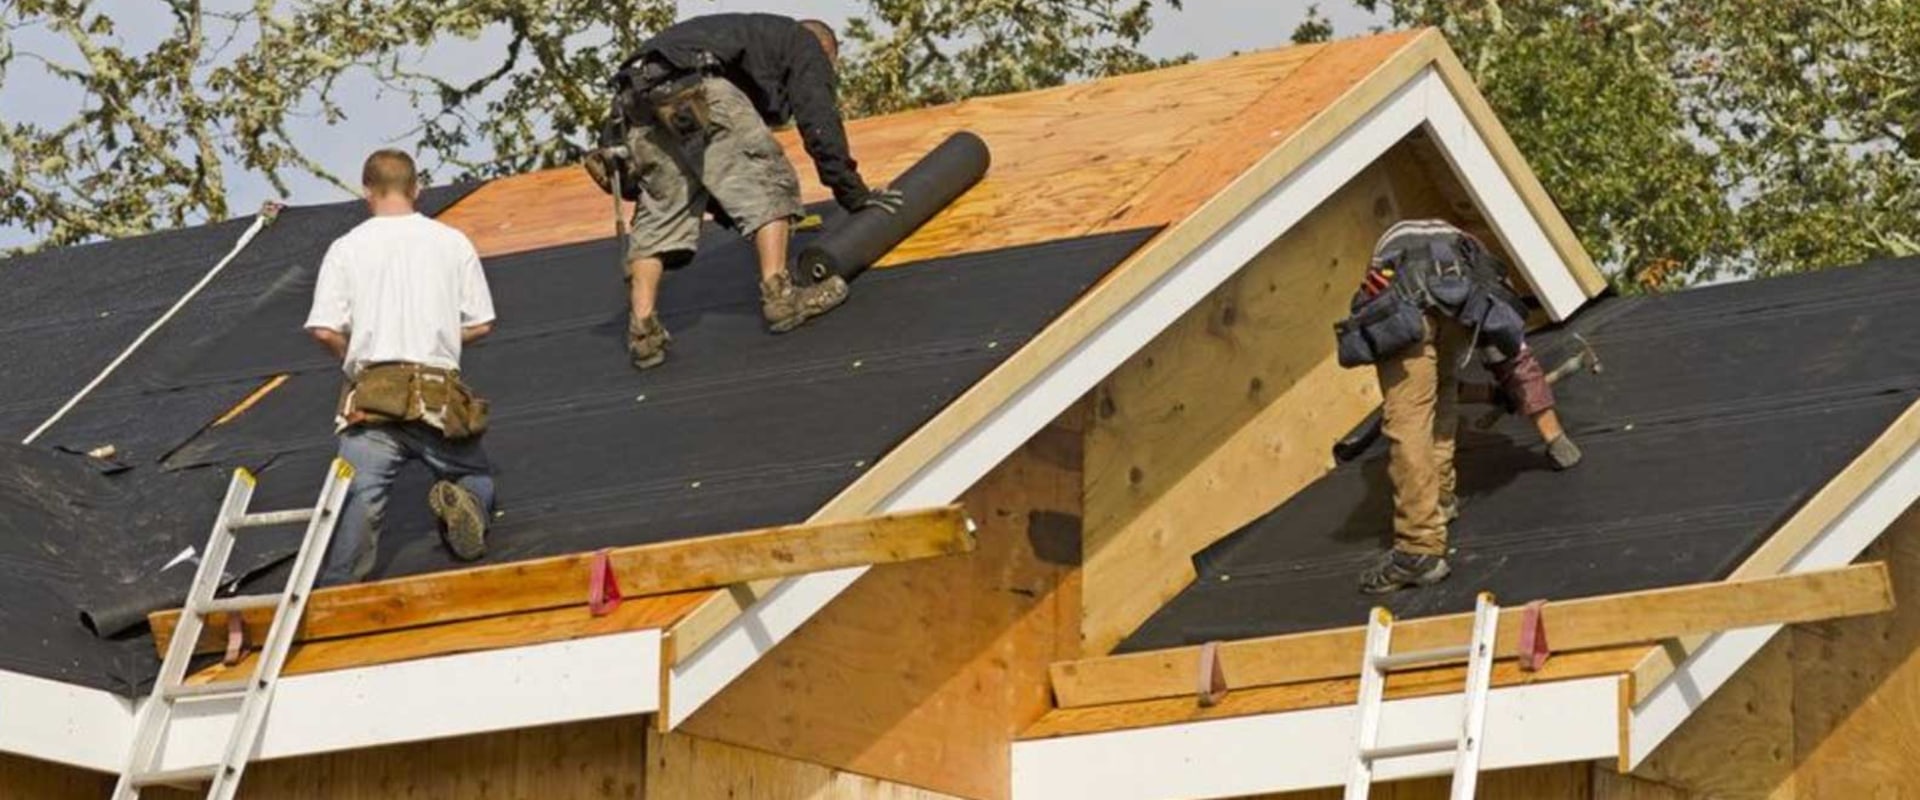 Can roofing underlayment be used on walls?